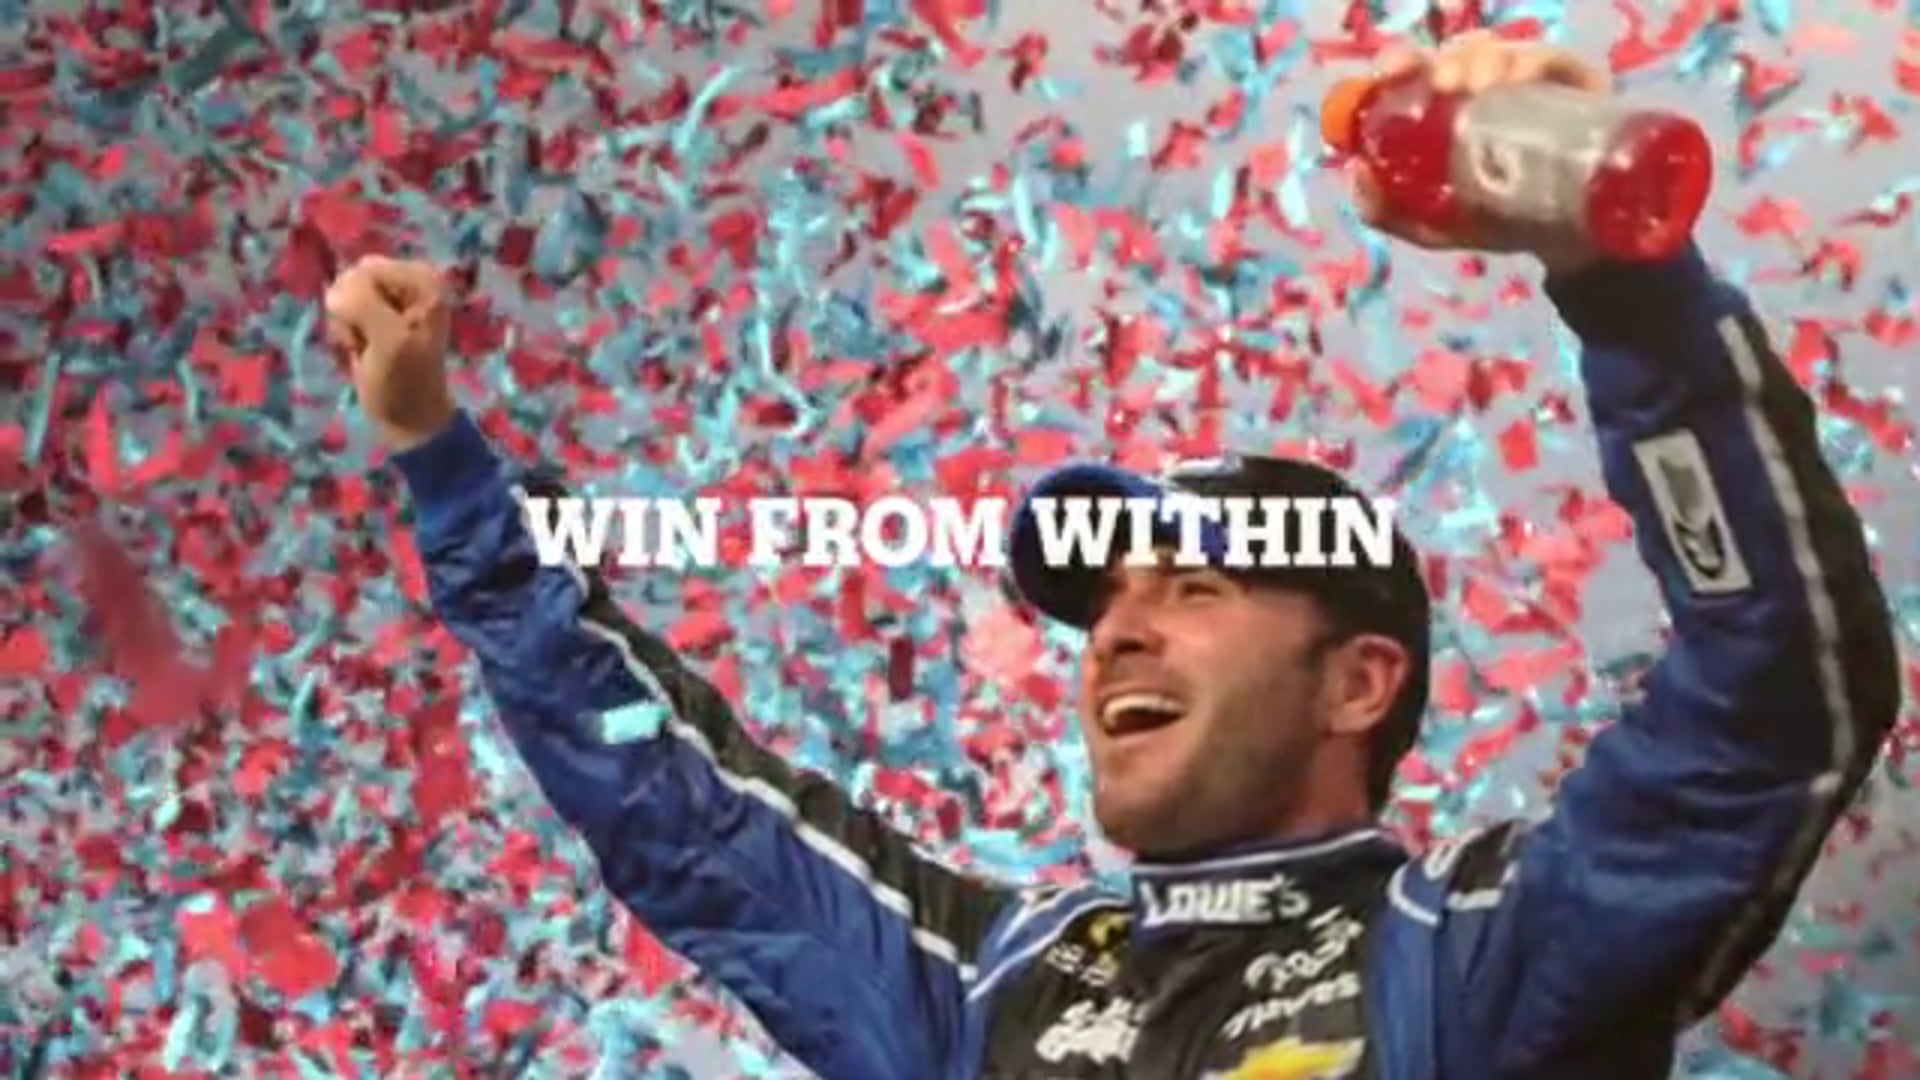 GATORADE :: "Win From Within" Campaign Created by VML